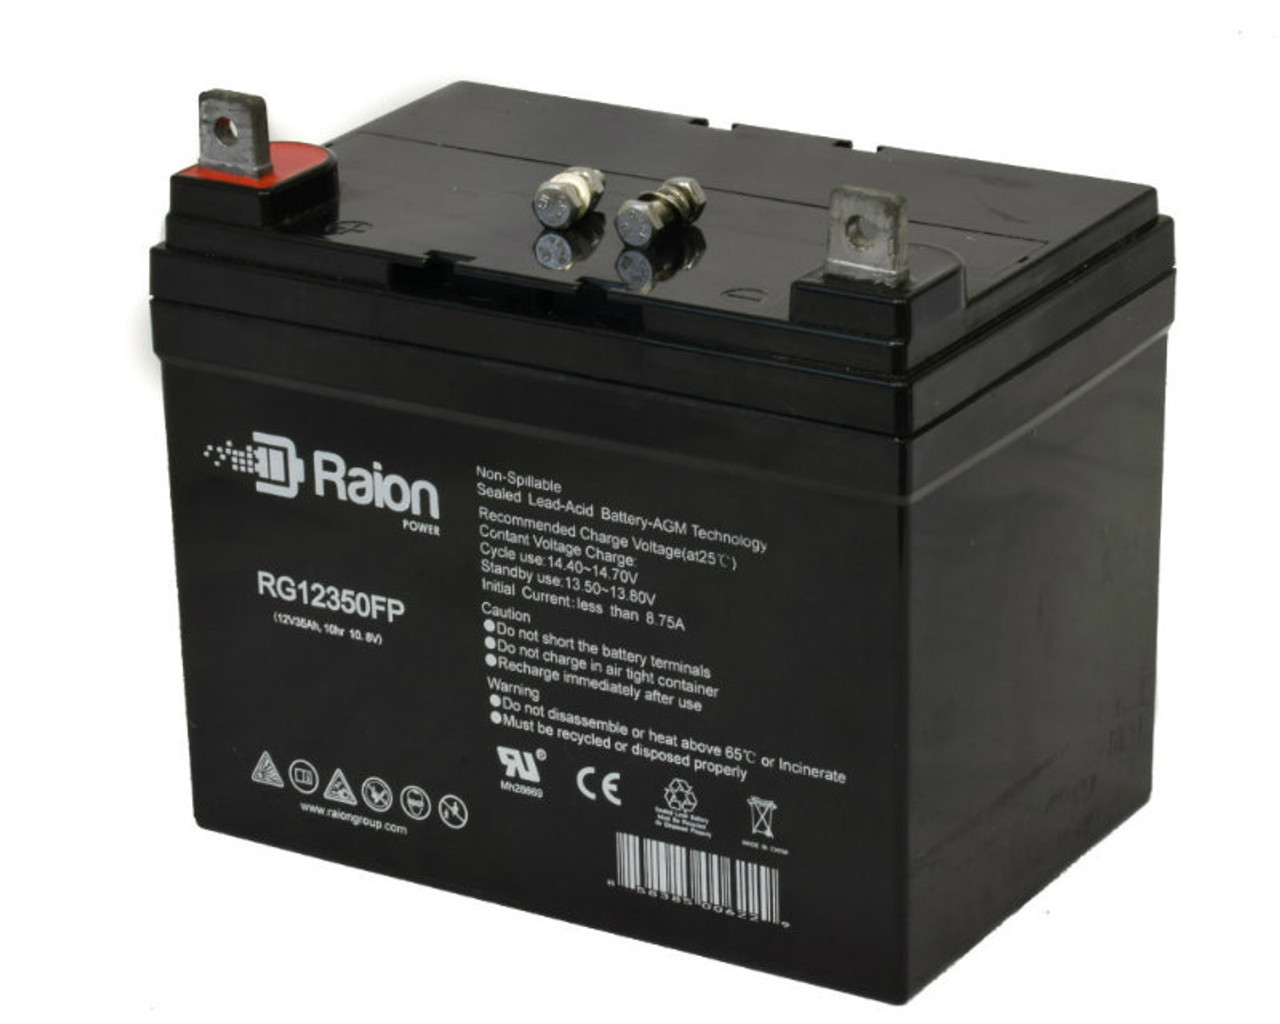 Raion Power Replacement 12V 35Ah RG12350FP Mobility Scooter Battery for A-Bec Scoota Bug